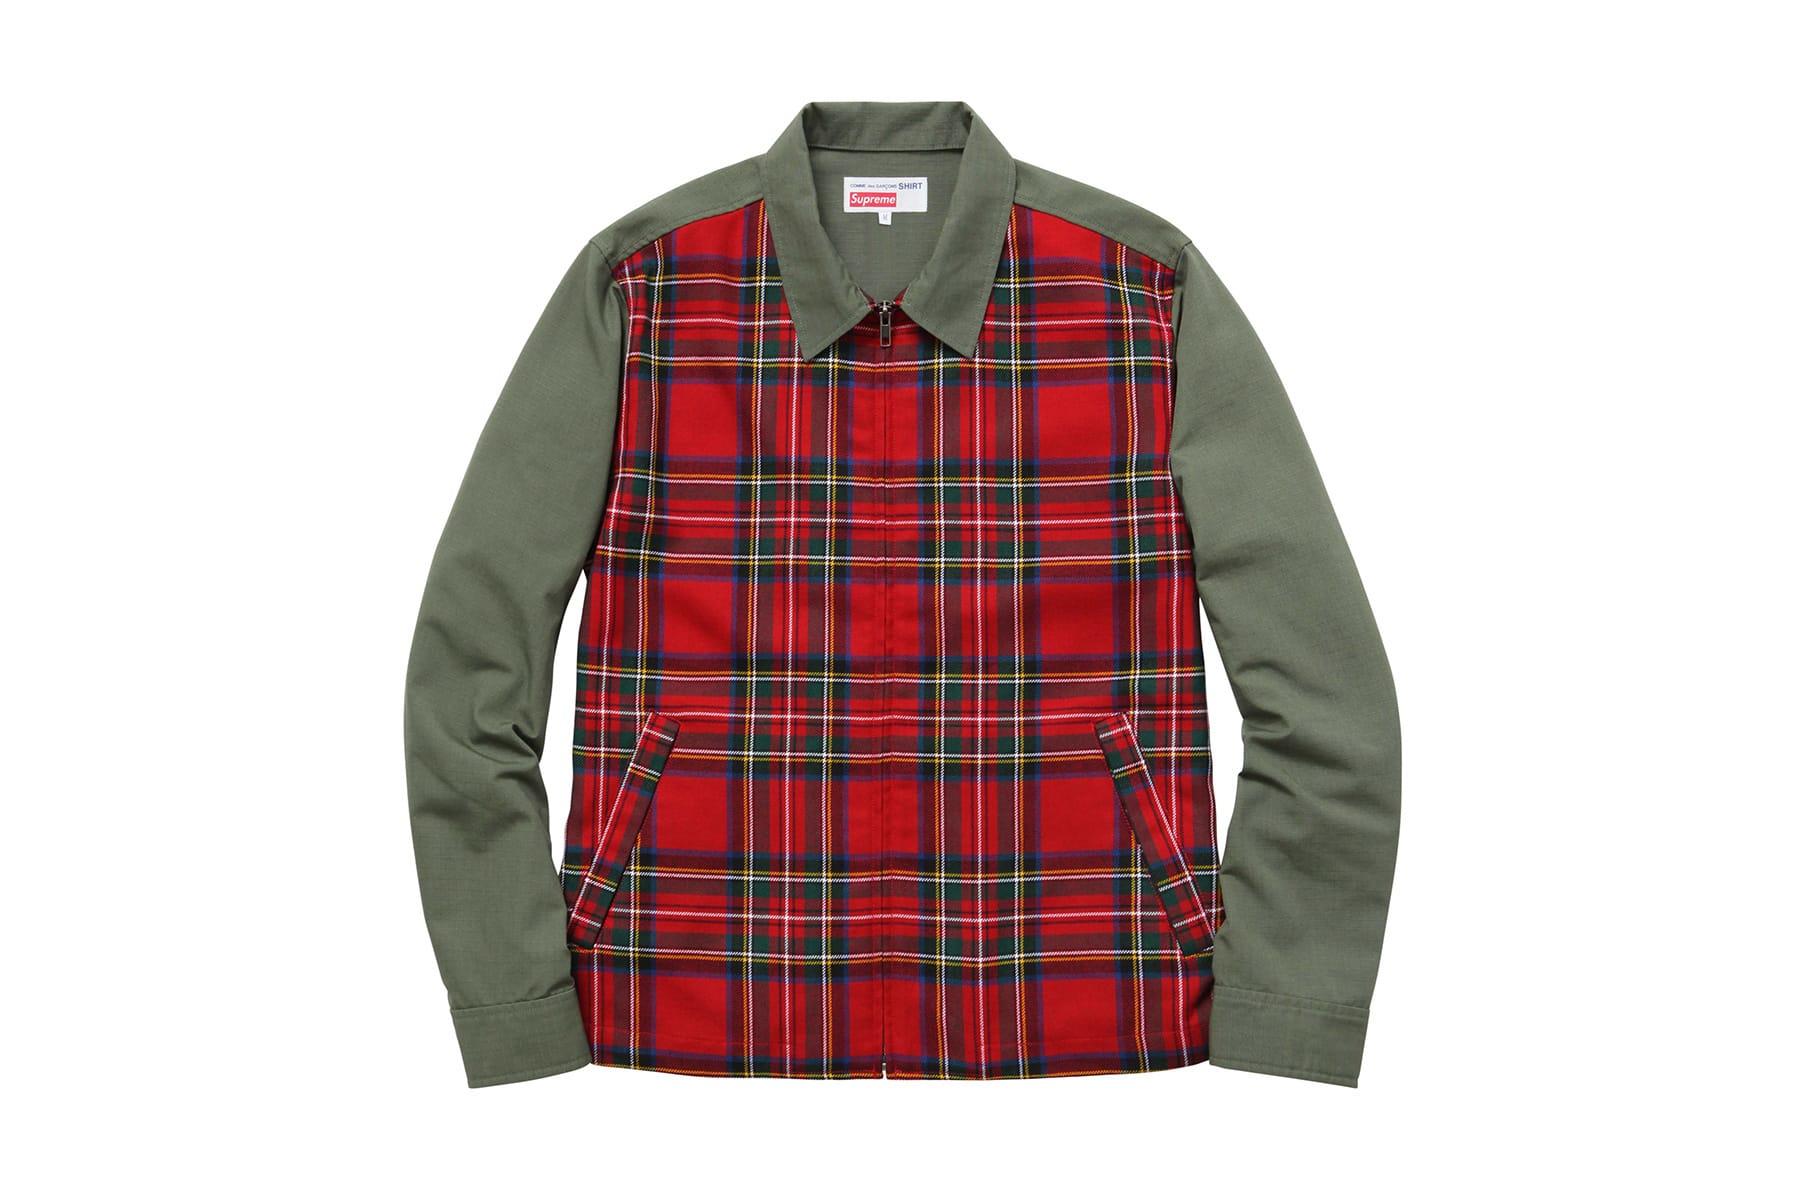 COMME des GARCONS SHIRT Supreme 2015 Fall Winter Collection